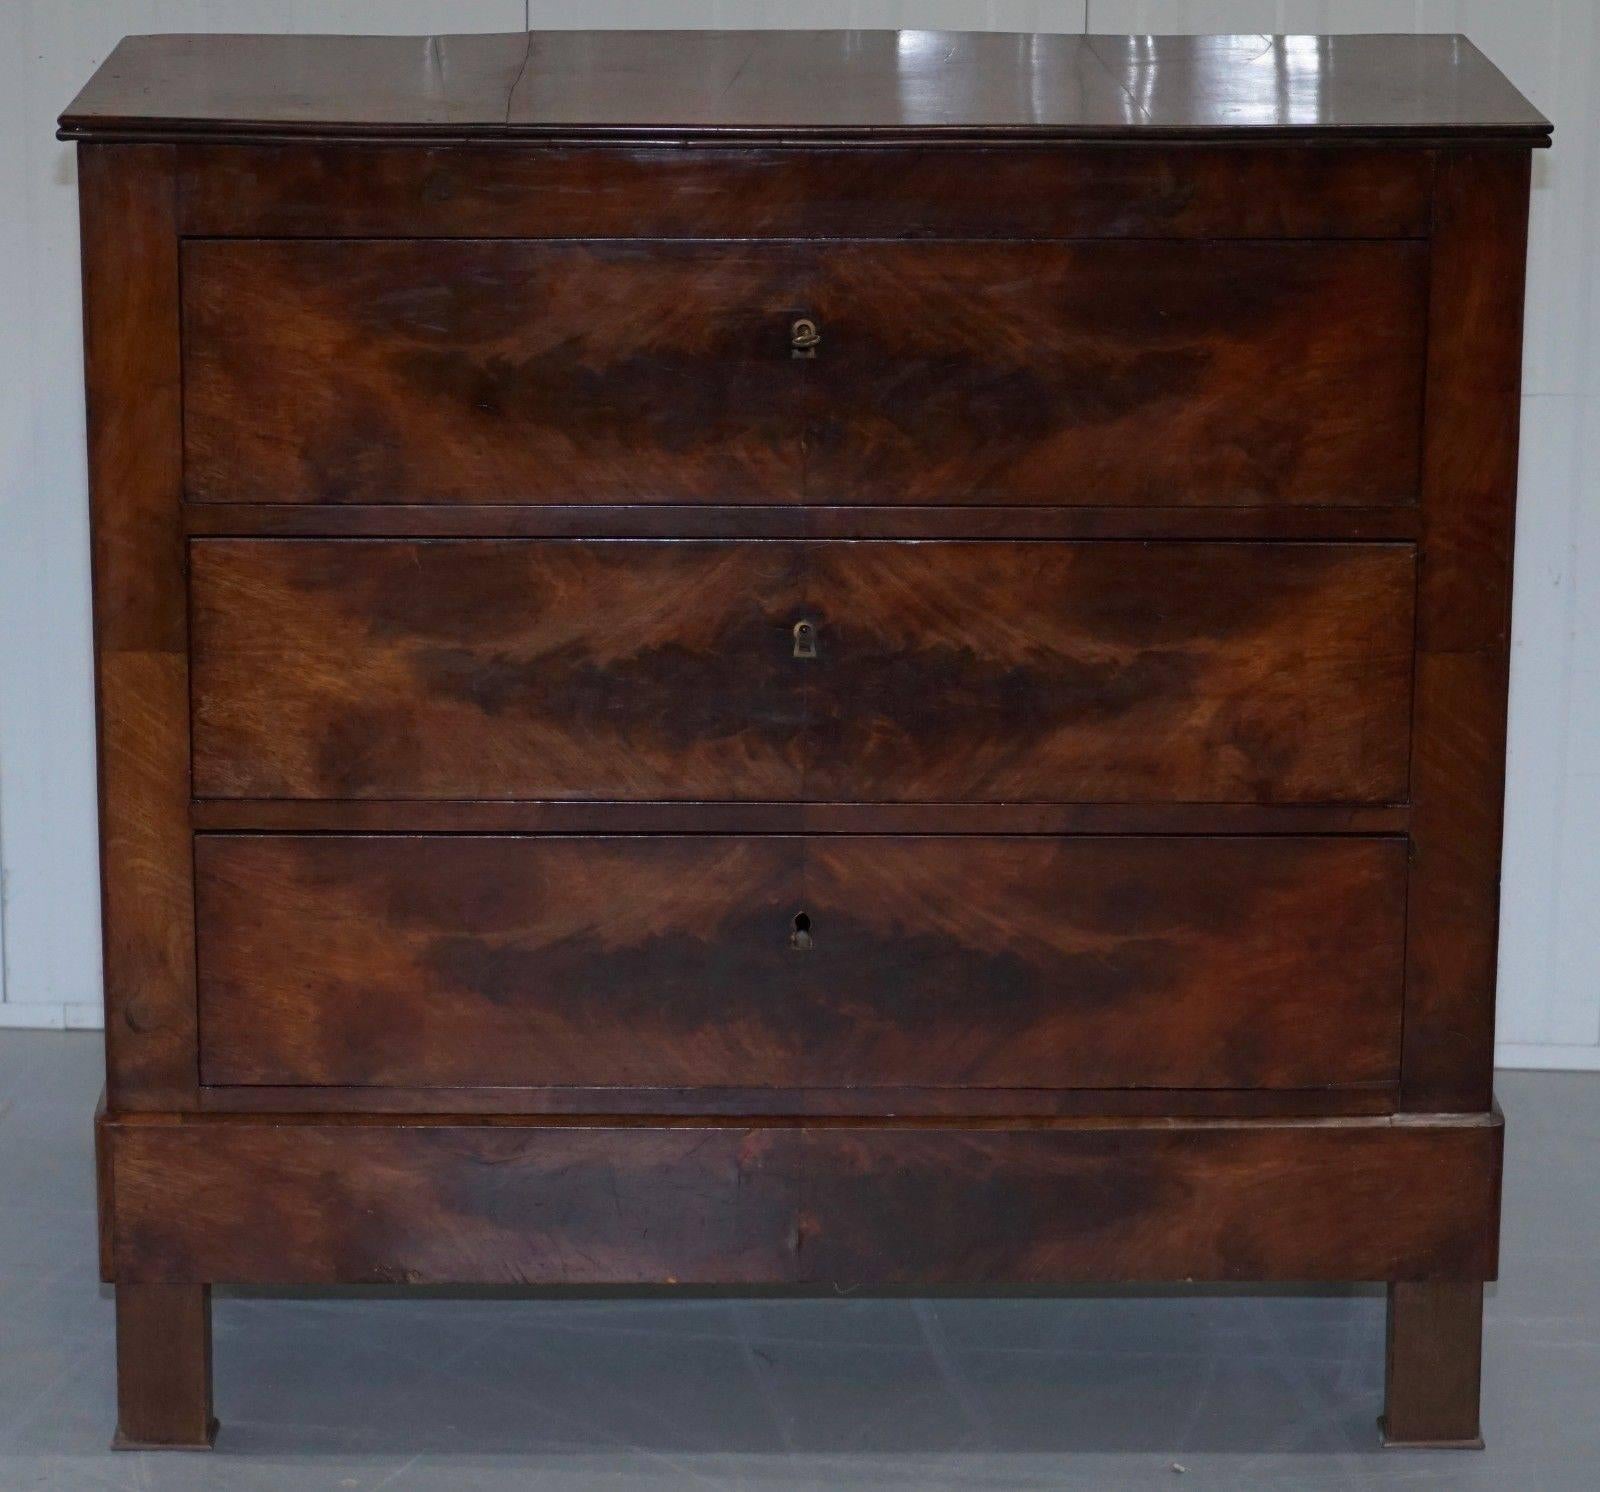 We are delighted to offer for sale this stunning circa 1880 Biedermeier mahogany chest of drawers

A very rare and good looking piece, the condition is well used, some timber splits here and there which is very standard with wood this old, the top